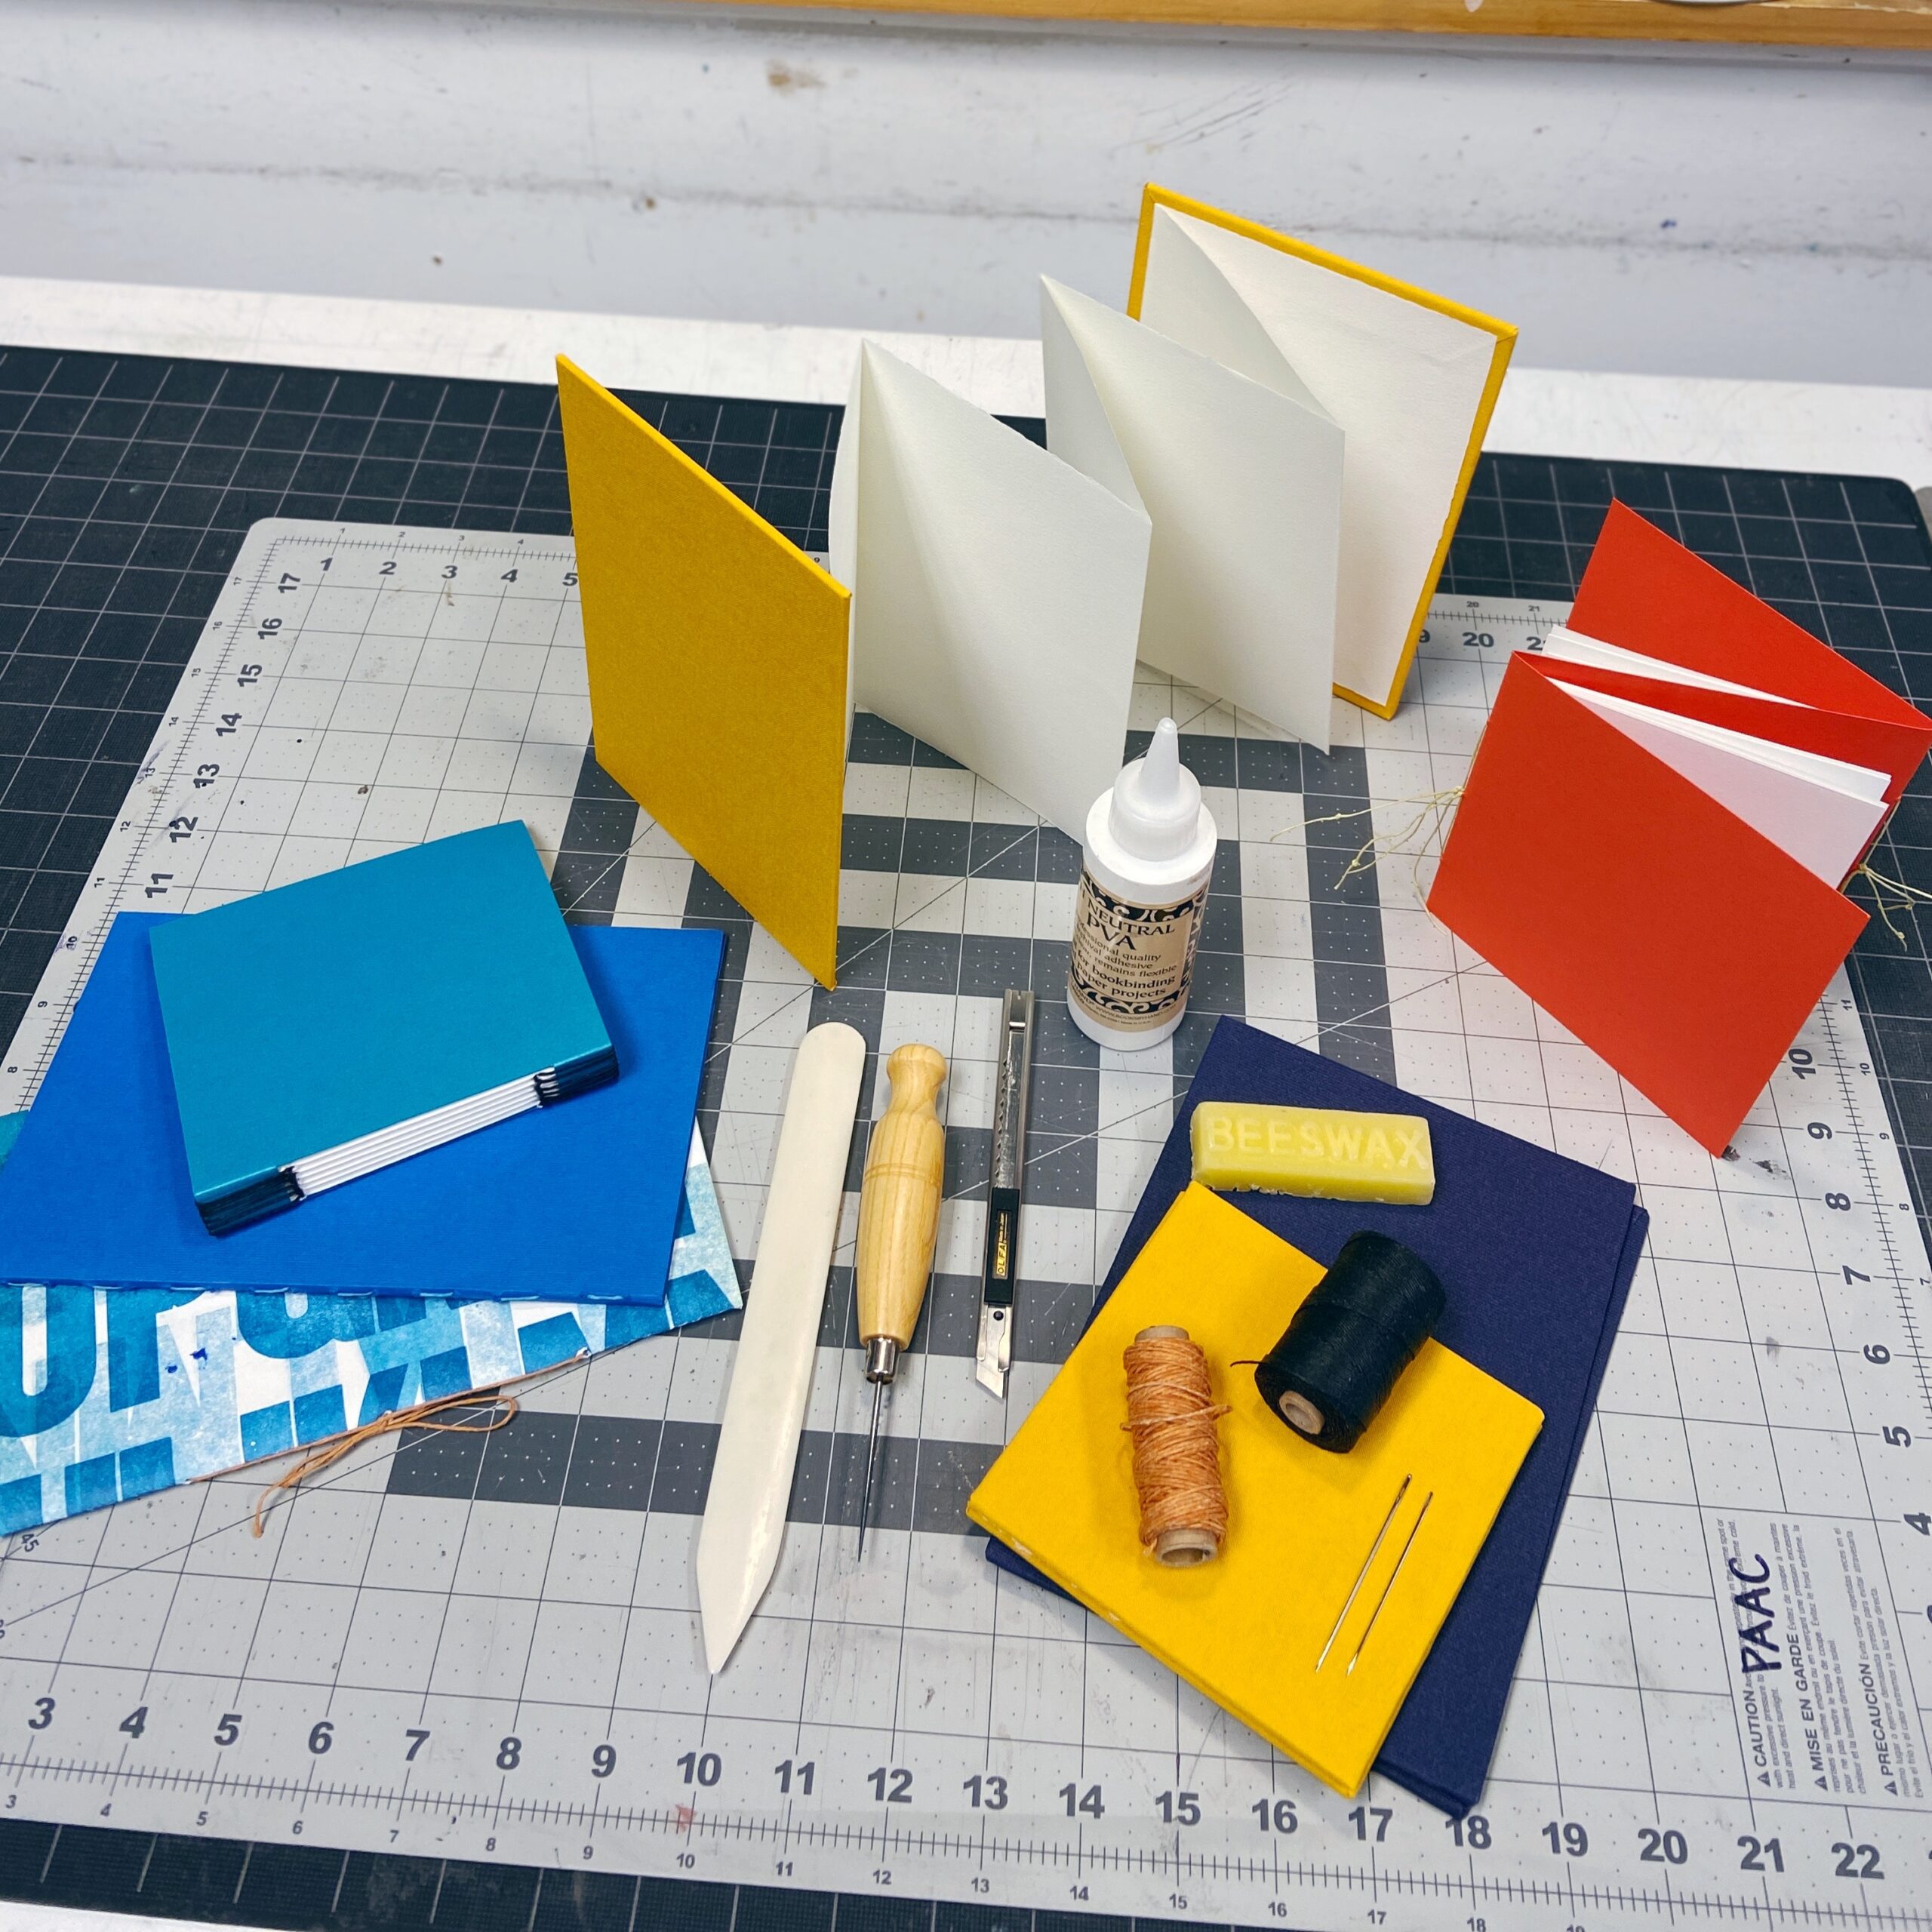 Introduction to Bookmaking: Folded Structures